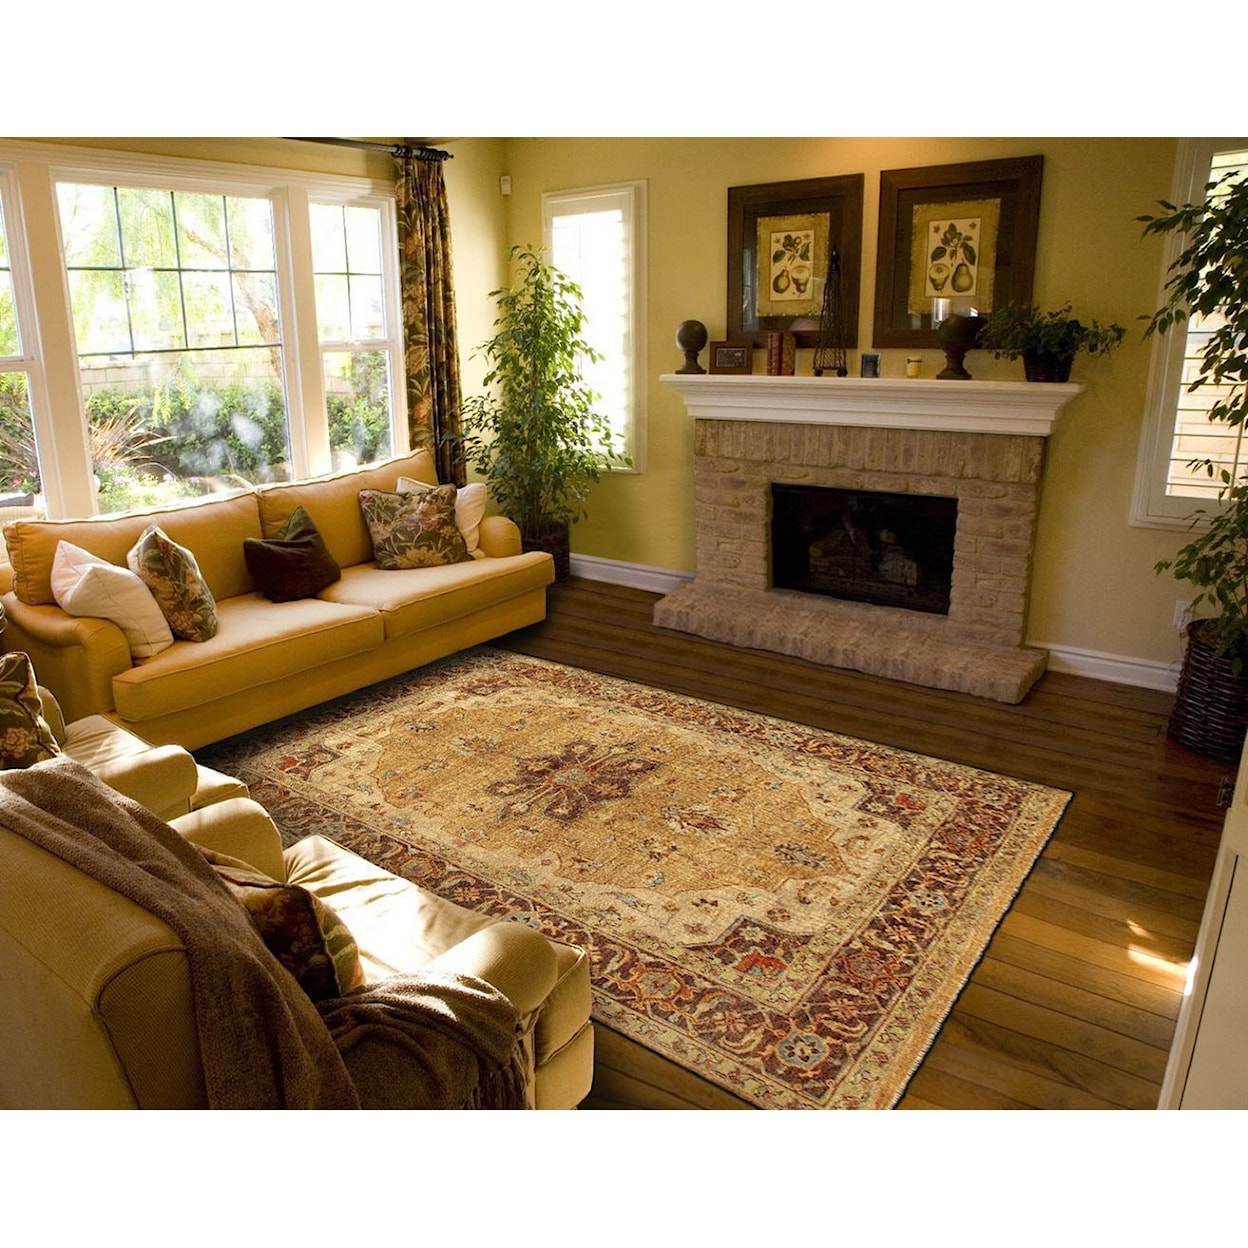 Feizy Rugs Ustad Gold/Brown 7'-9" x 9'-9" Area Rug